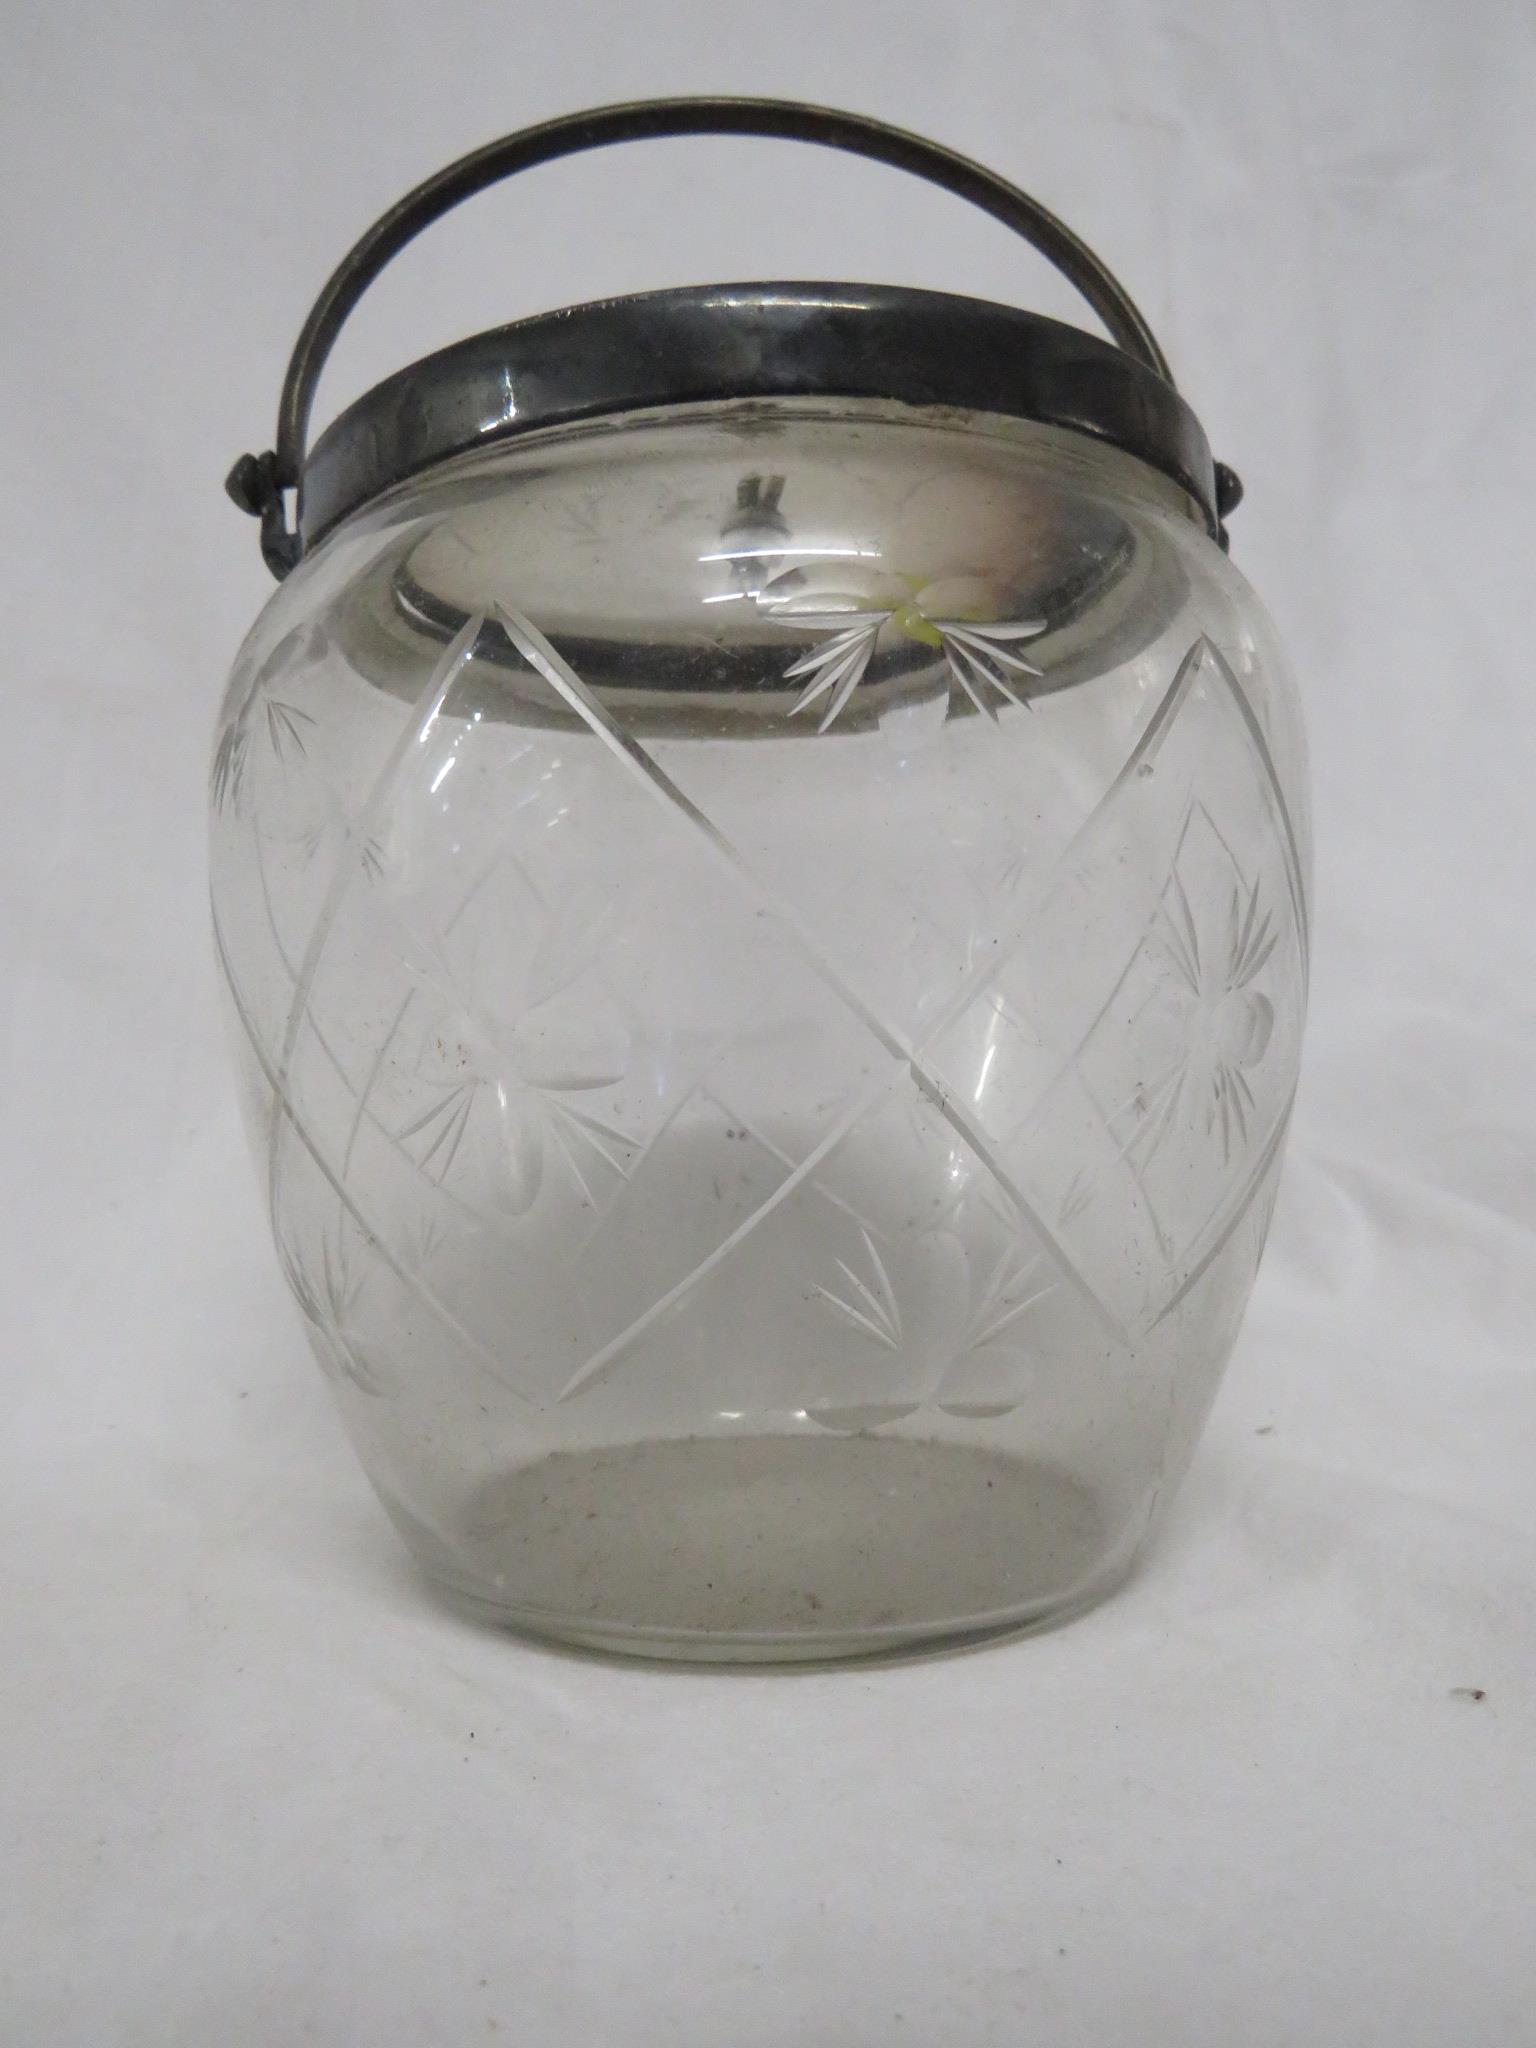 CUT GLASS BISCUIT BARREL WITH SILVER PLATED LID WITH 1914 BRIGHTON COLLEGE SPORTS ENGRAVING TO R S - Image 2 of 3